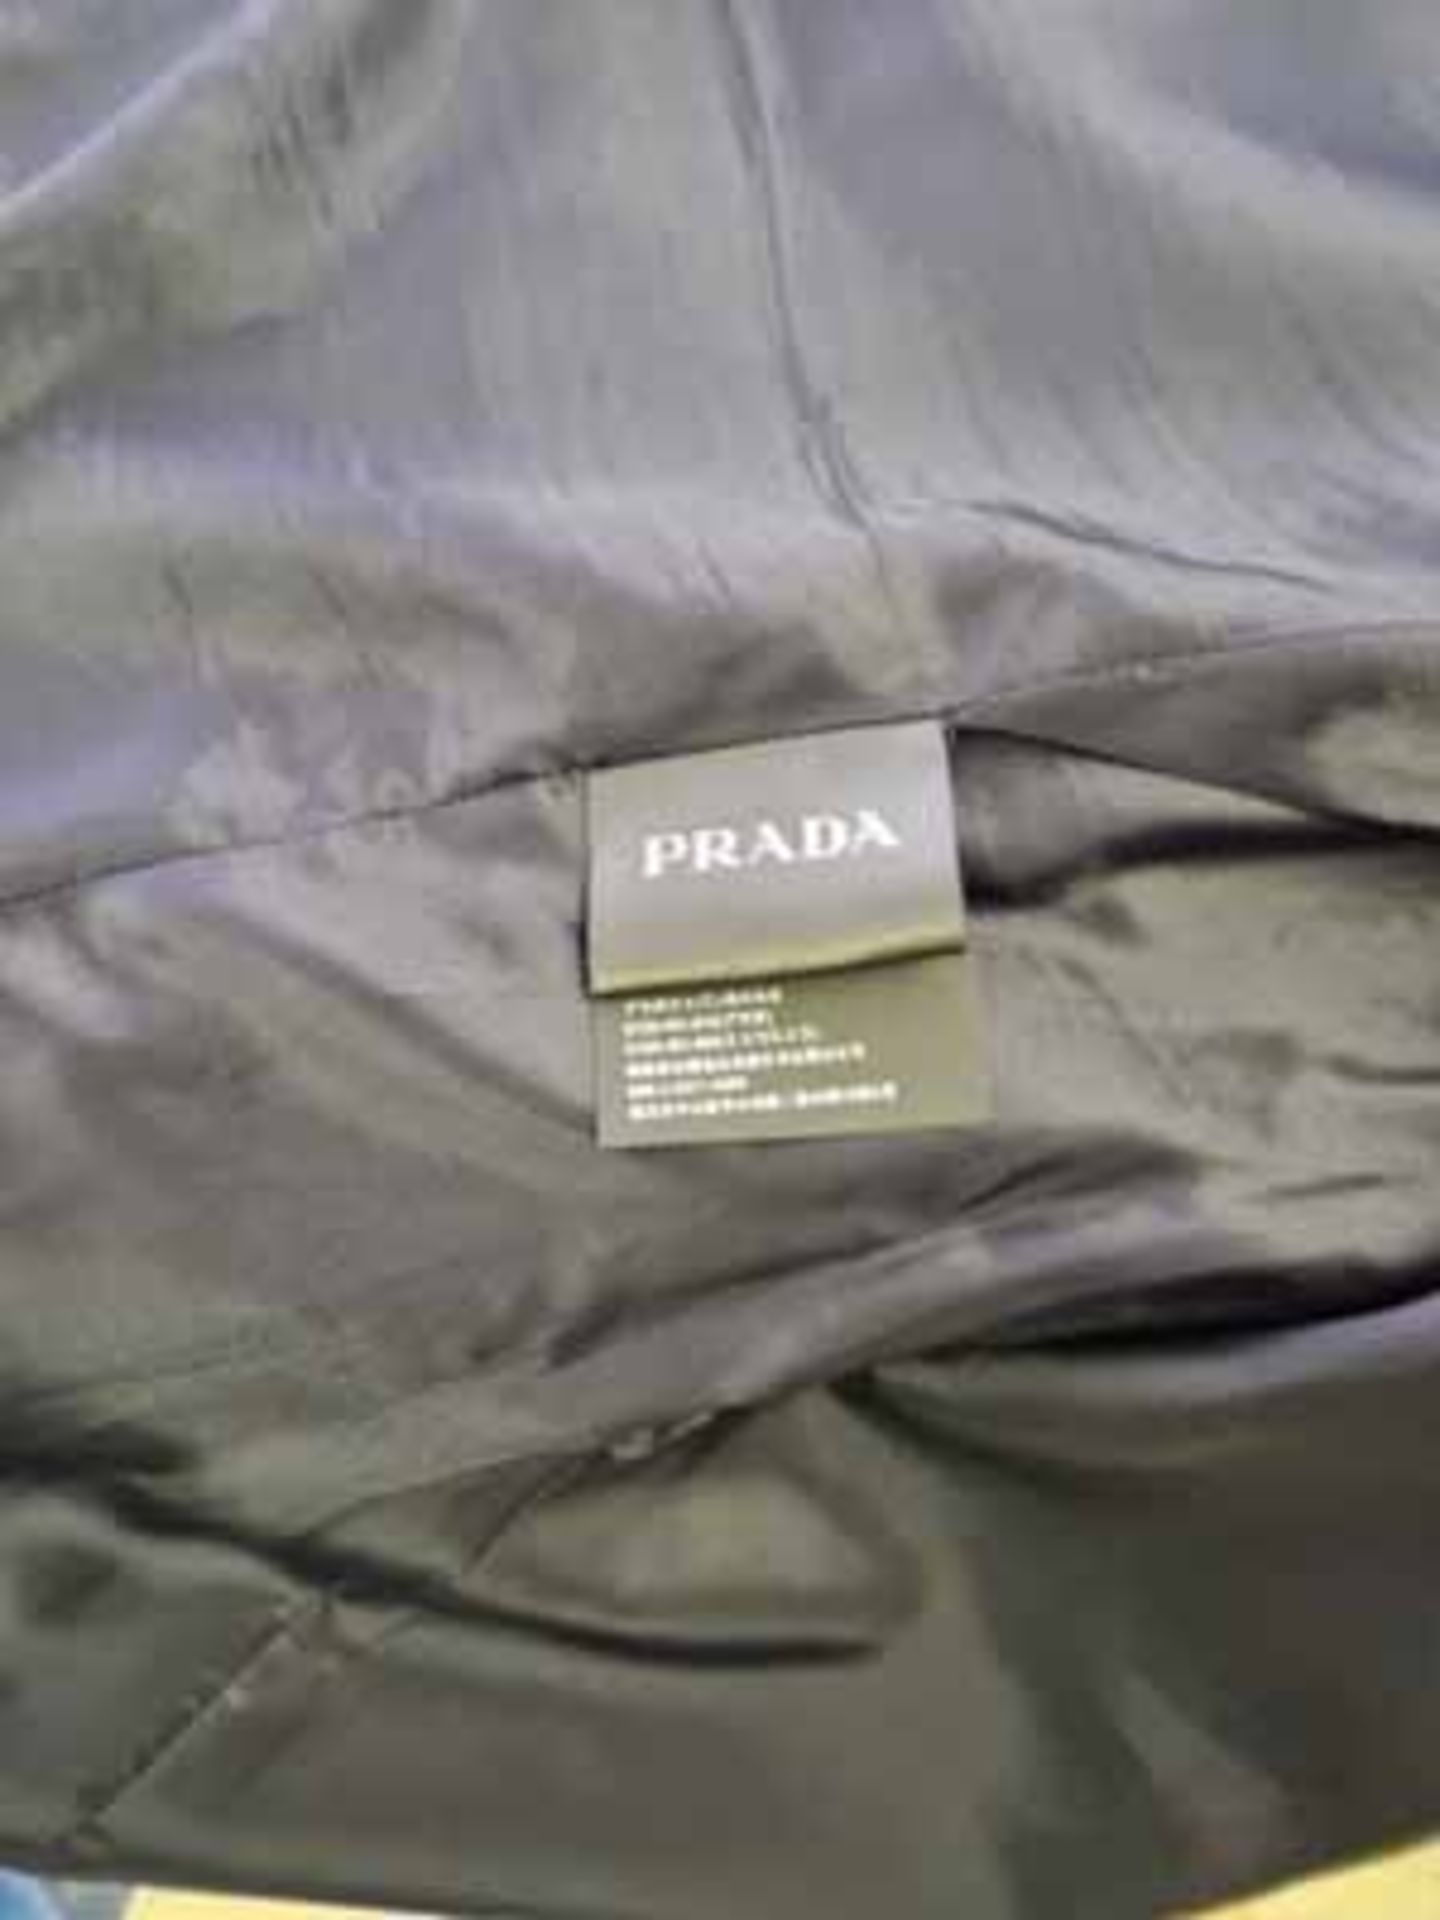 A PRADA Lux 100 per cent Calf Skin Leather Jacket in Inky Blue with 100 per cent Viscose Lining with - Image 2 of 4